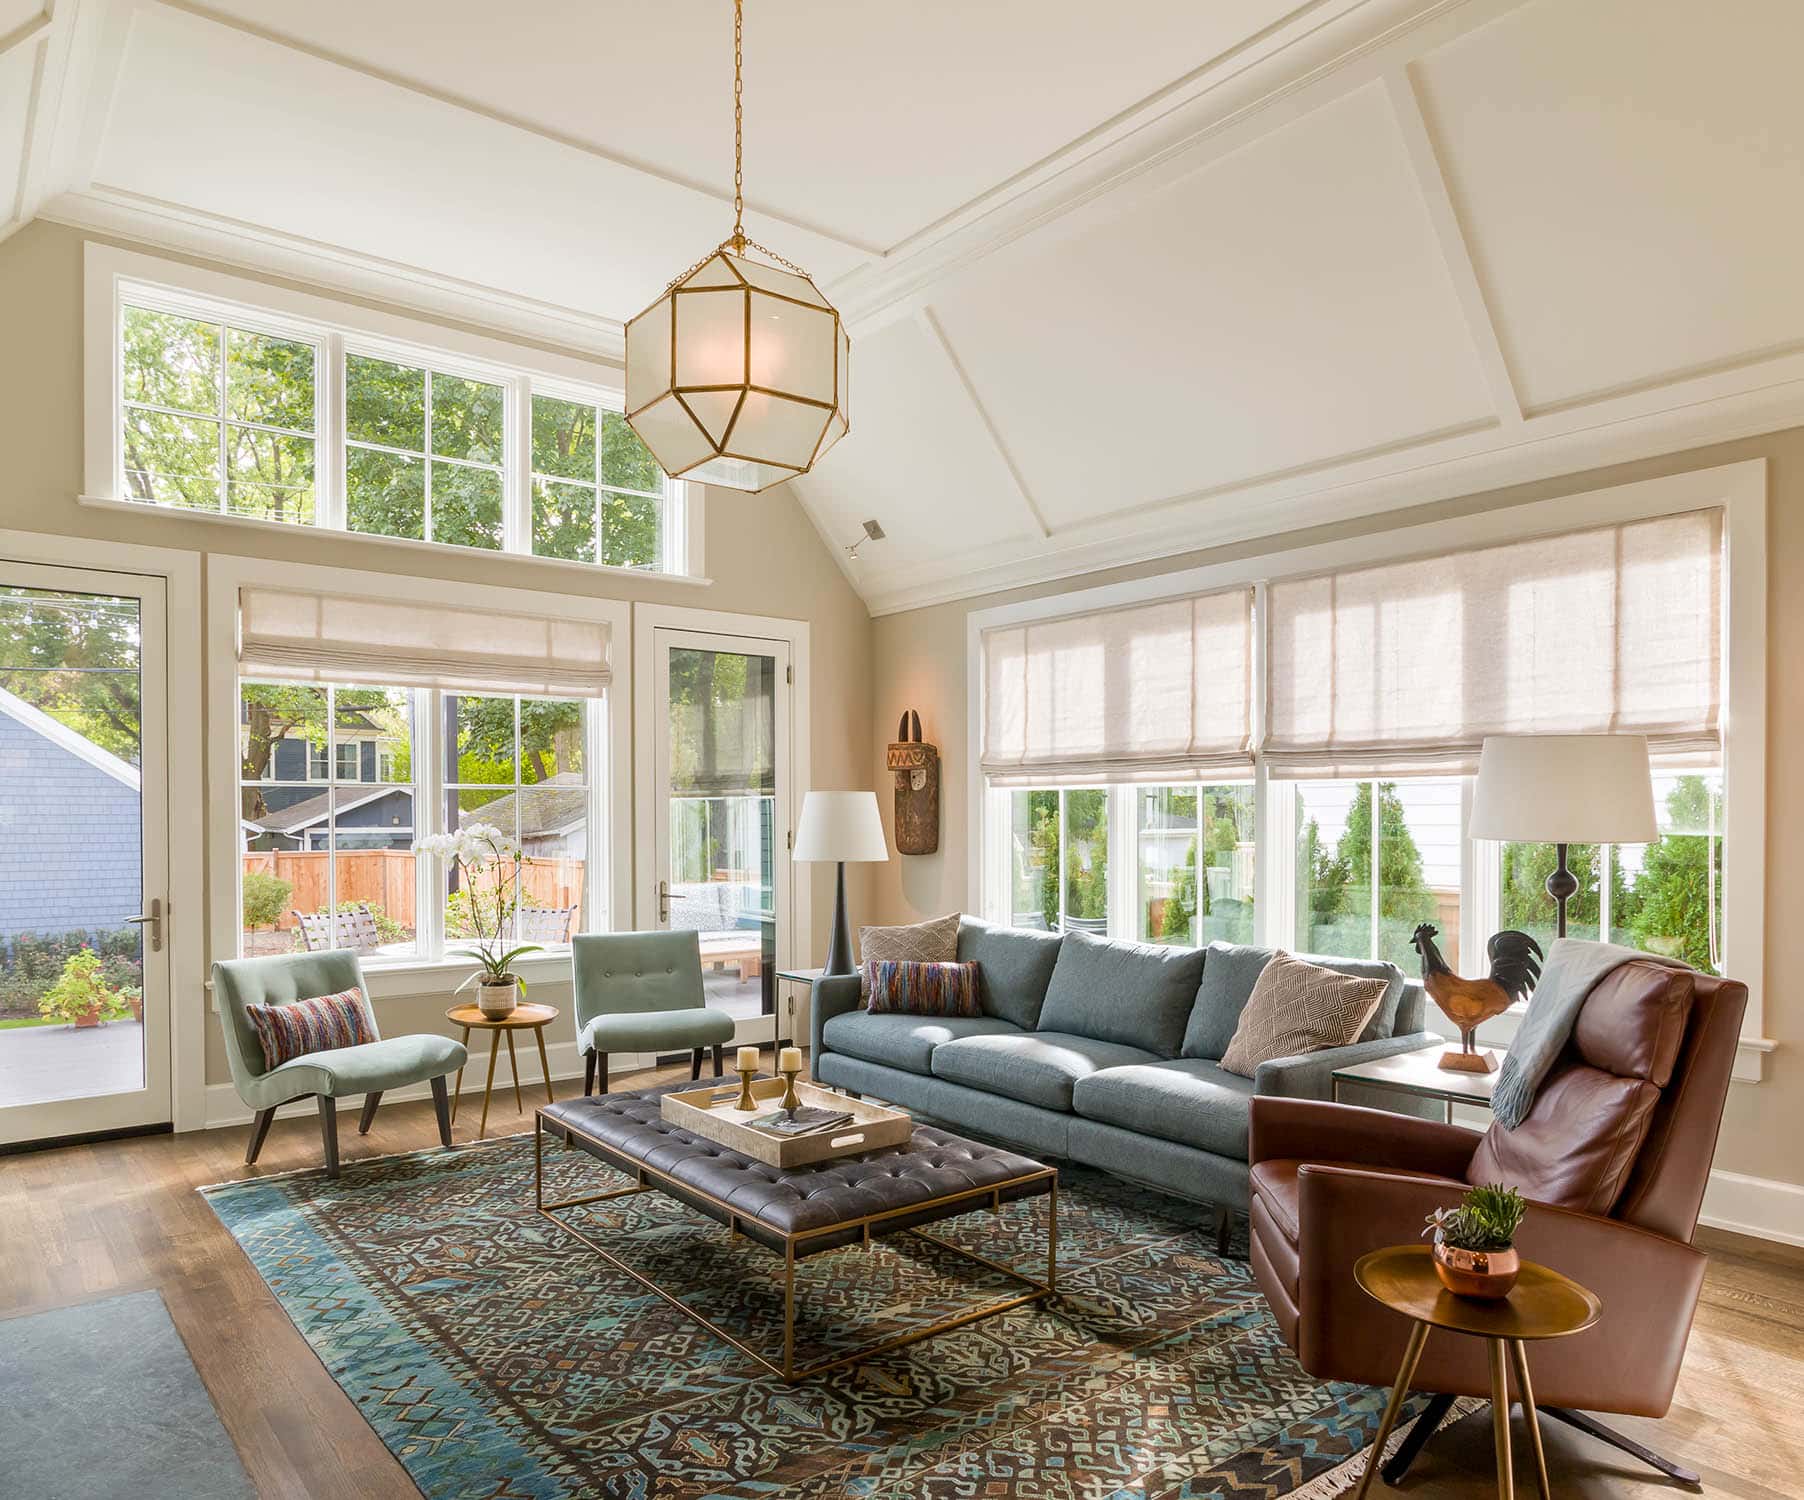 Evanston Modern farmhouse living room with barrel-vaulted ceilings, wall of windows and doors to back deck